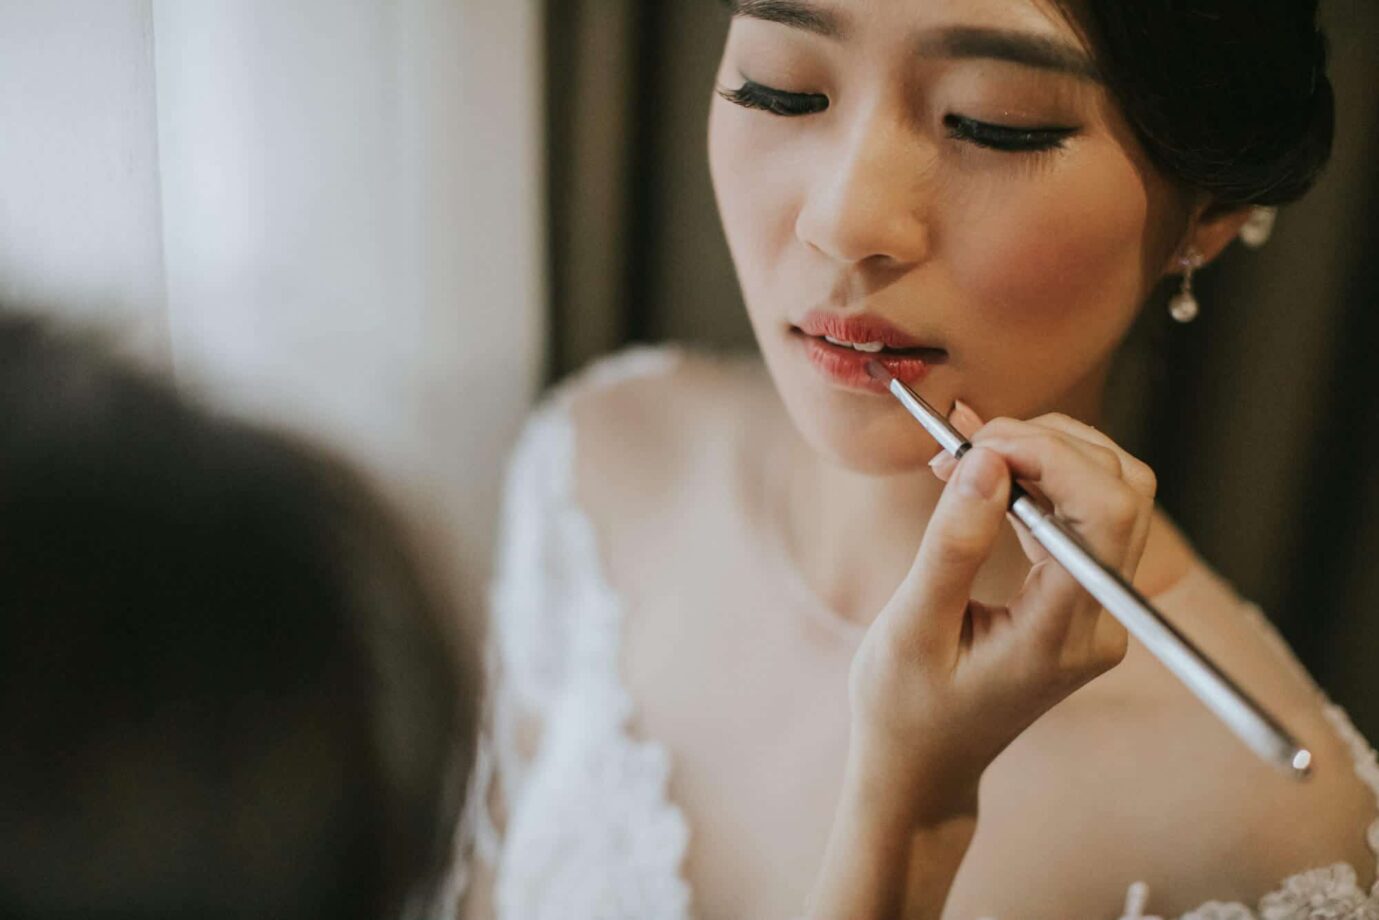 fairy tail beautiful wedding gown dress Malaysia Classic Simple elegant Wedding St. Andrew Presbyterian Church Kuala Lumpur Cliff Choong Photography bride bridesmaids groom getting ready makeup lips red white